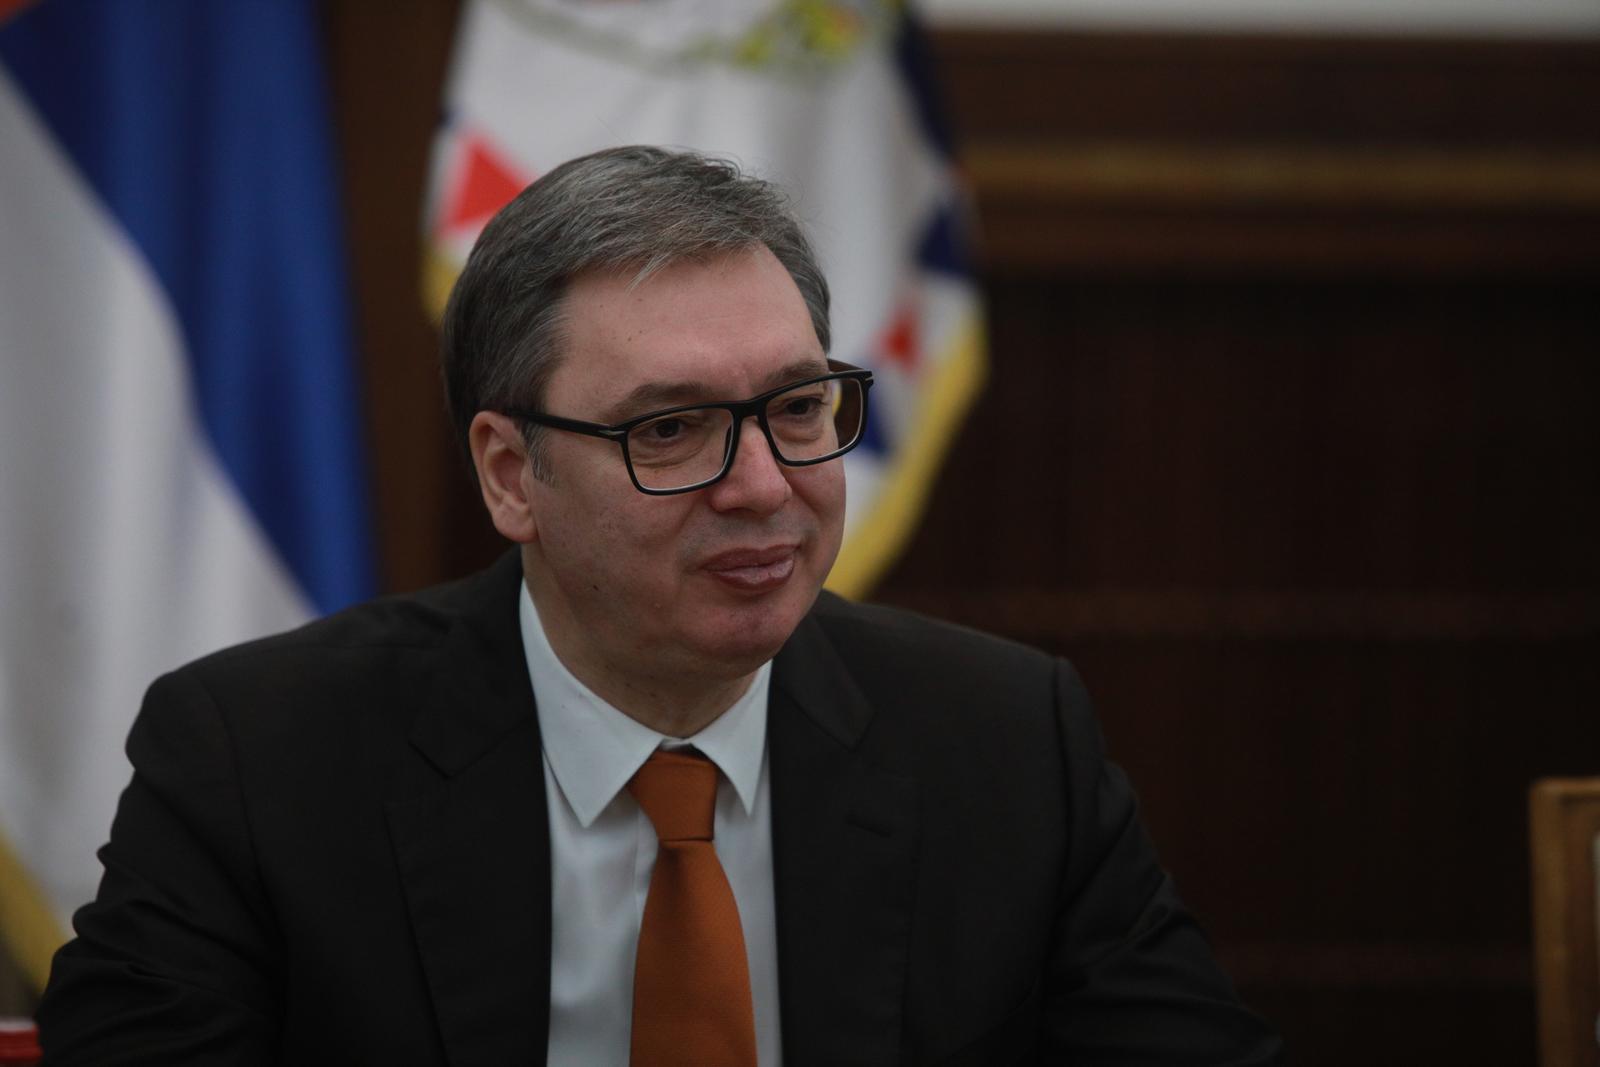 10, October, 2023, Belgrade - The President of the Republic of Serbia, Aleksandar Vucic, met with the President of the Parliament of the Republic of Iraq, Mohamed Al-Halbousi, who is on an official visit to the Republic of Serbia. Aleksandar Vucic. Photo: Milos Tesic/ATAImages

10, oktobar, 2023, Beograd - The President of the Republic of Serbia, Aleksandar Vucic, met with the President of the Parliament of the Republic of Iraq, Mohamed Al-Halbousi, who is on an official visit to the Republic of Serbia. Photo: Milos Tesic/ATAImages Photo: Milos Tesic/ATA Images/PIXSELL